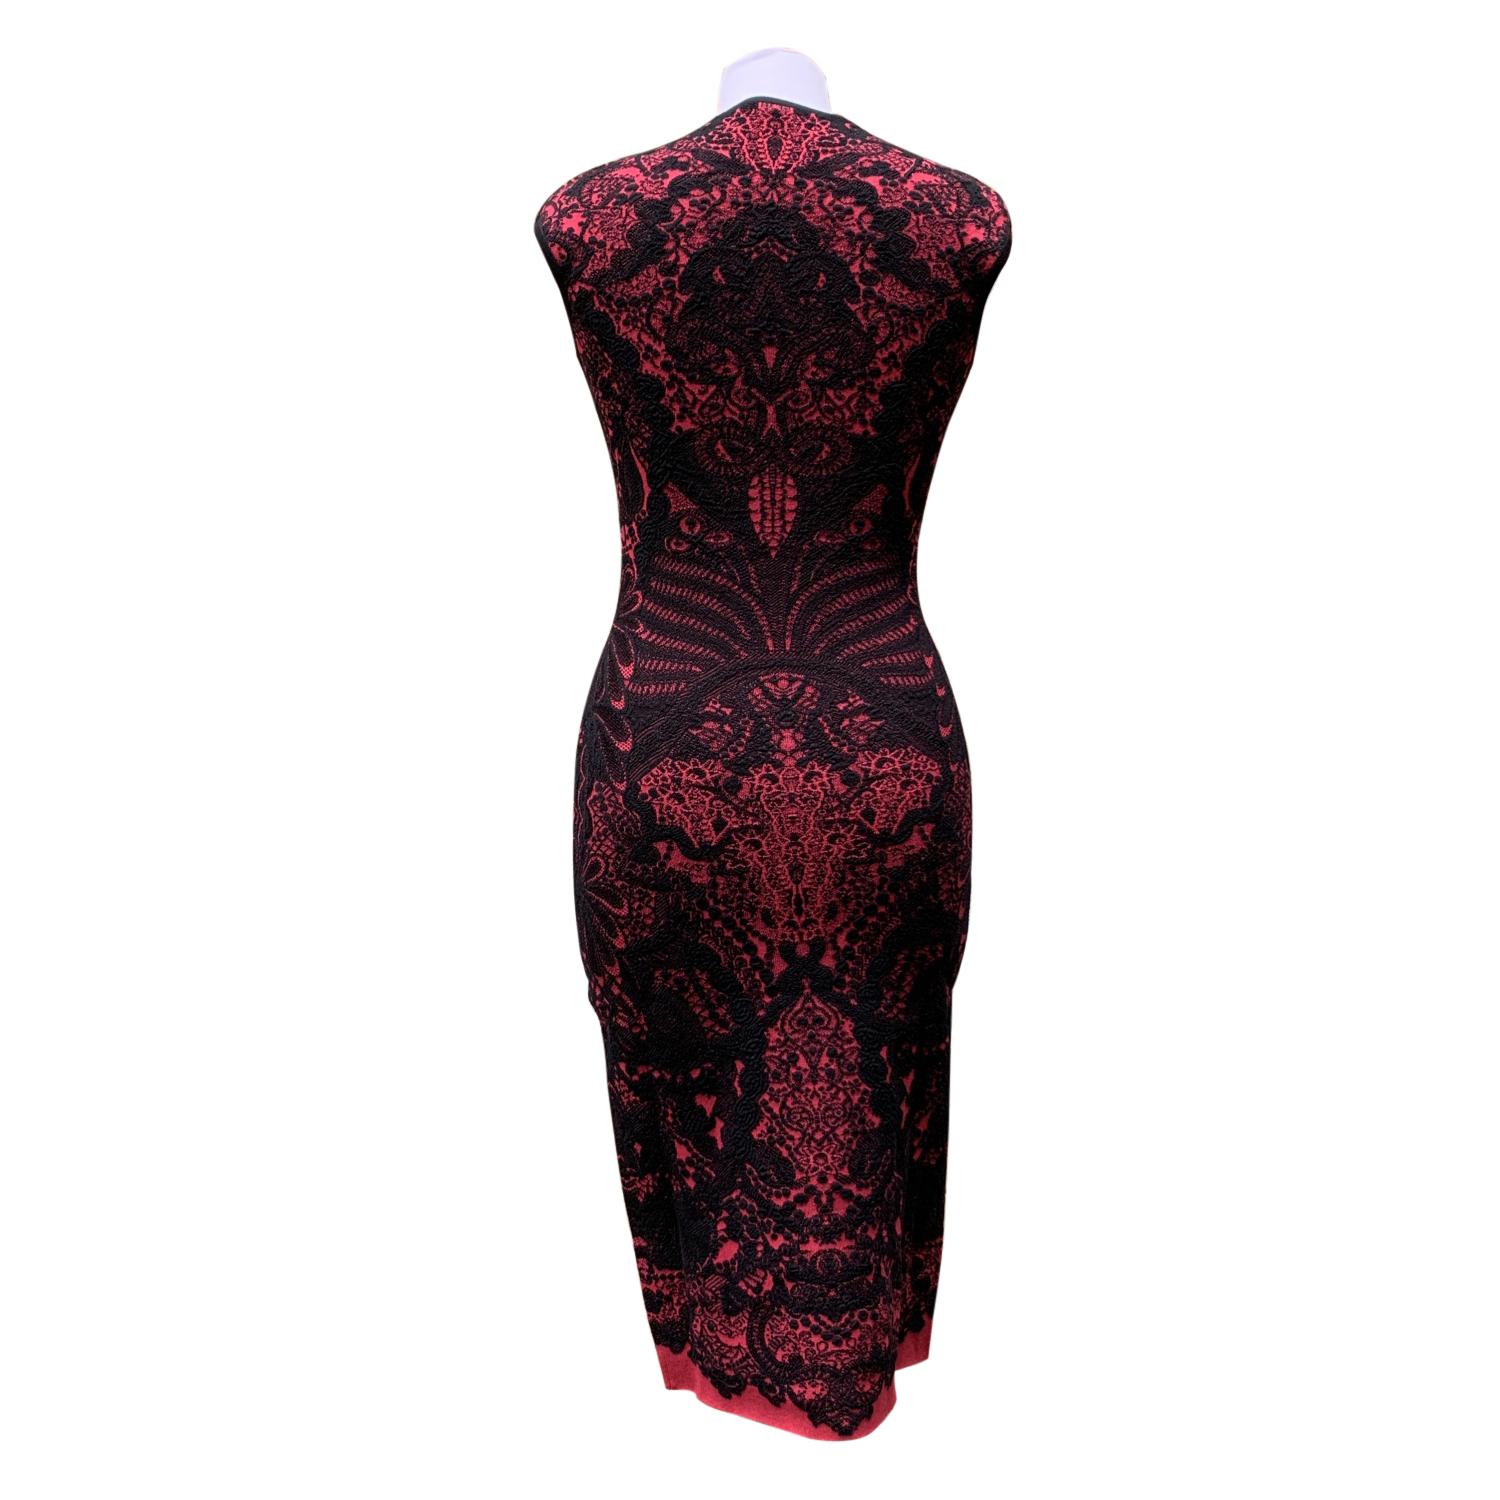 Beautiful Cocktail dress Alexander McQueen. Crafted of a wool blend stretch fabric in red and black color. Intarsia lace pattern. Cap sleeves and crew neckline. Bodycon fir. Unlined. Composition: 52% wool, 41% Modal, 7% polyester. Size : Small (The